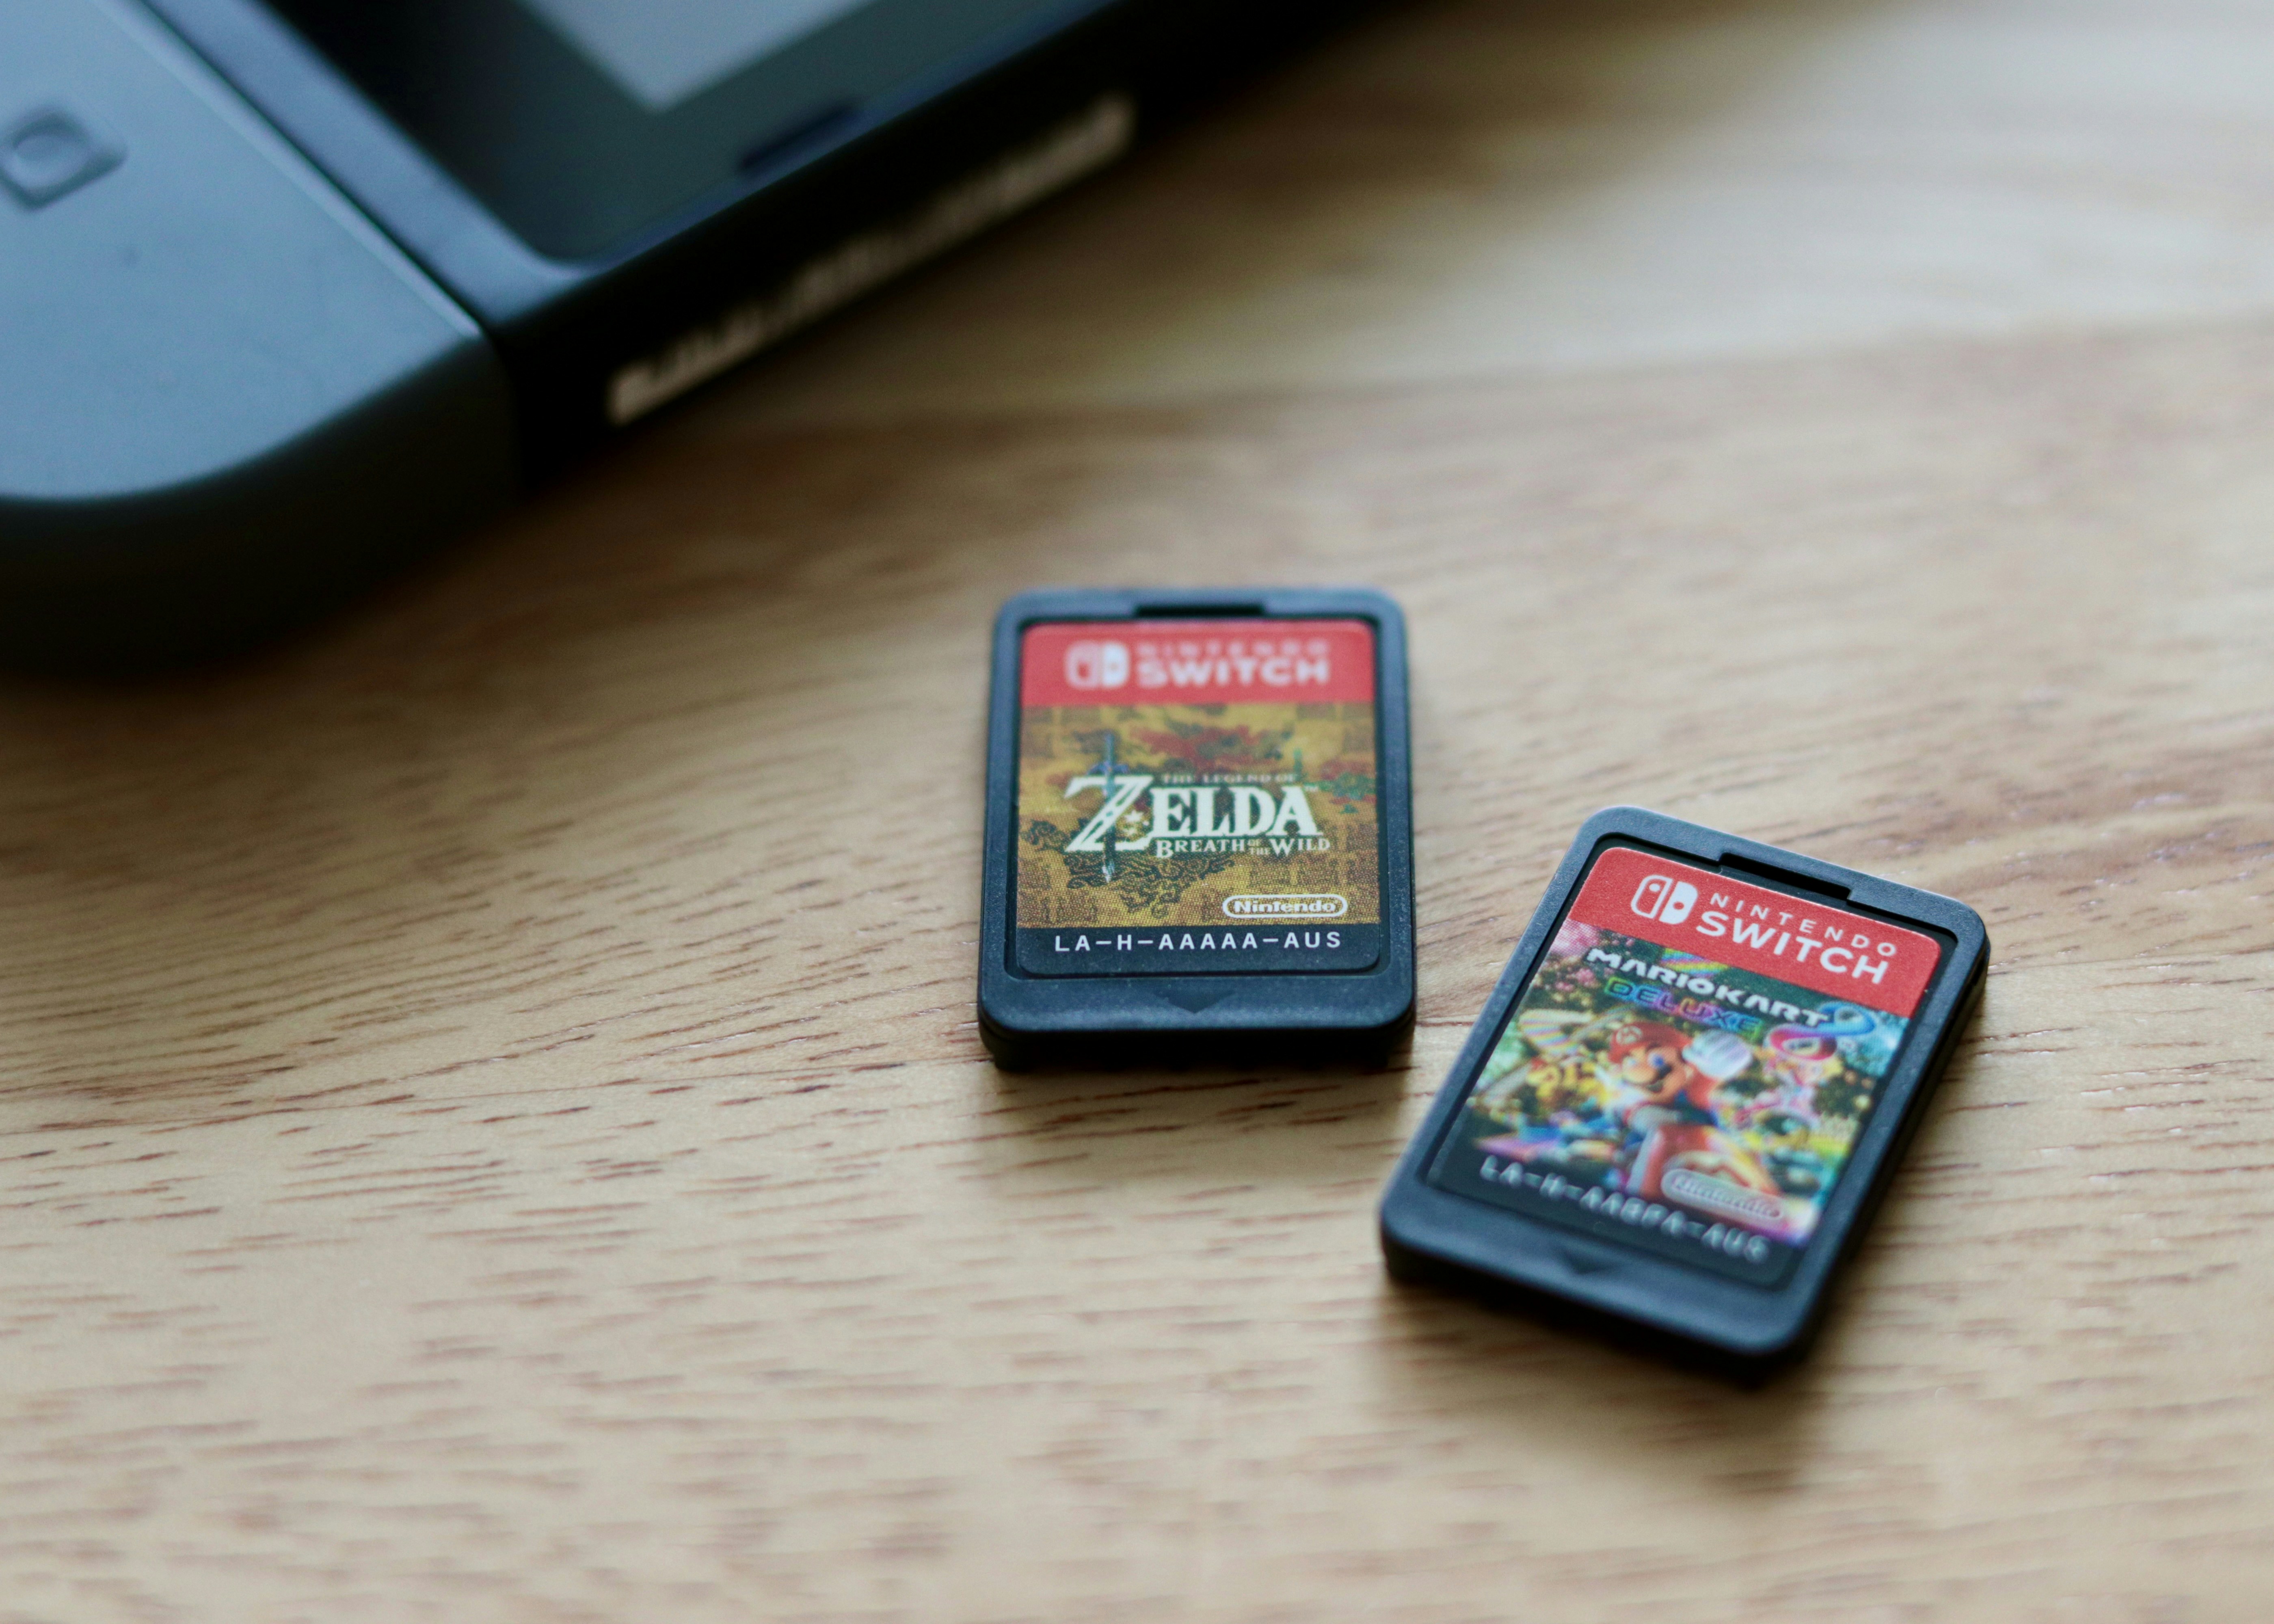 Two video game cartridges for the Nintendo Switch laying on a wooden table. The one at the front is for Mario Kart 8; the one on the left is for The Legend of Zelda: Breath of the Wild. Also in the background is the corner of a black Nintendo Switch console in its handheld mode, with both controllers locked onto the body of the device.